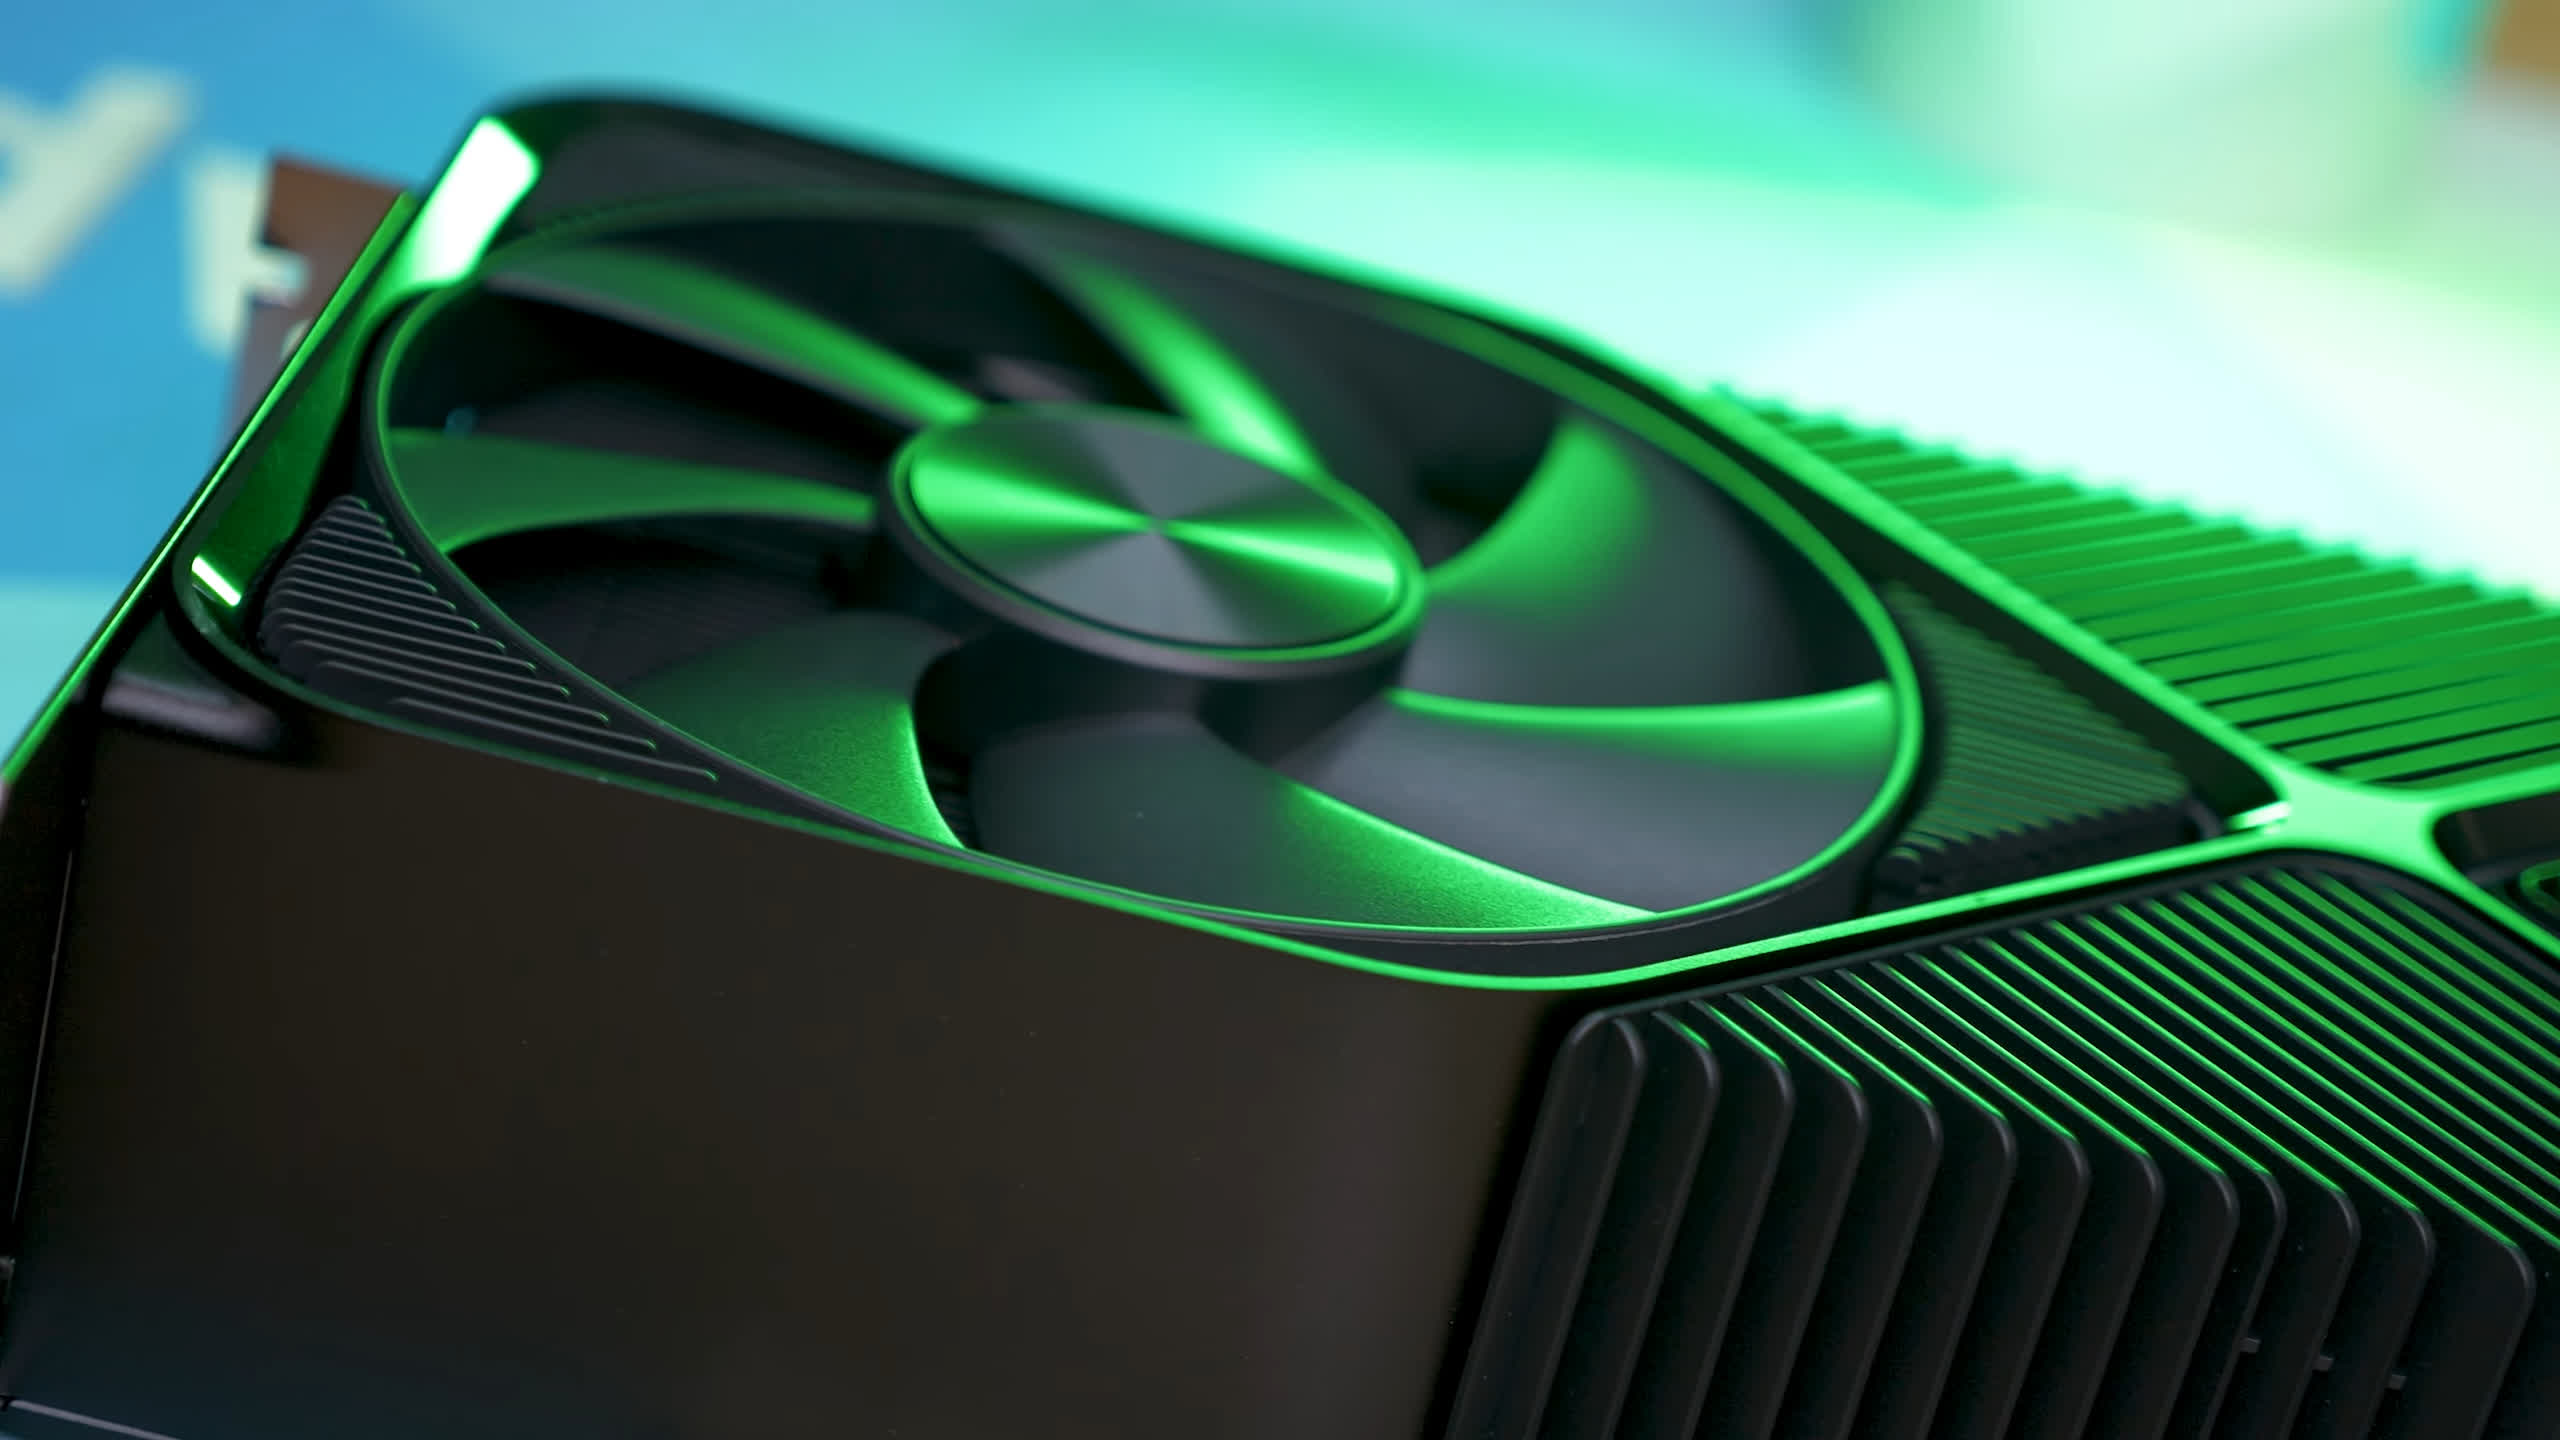 Nvidia GeForce RTX 4080 Super Review